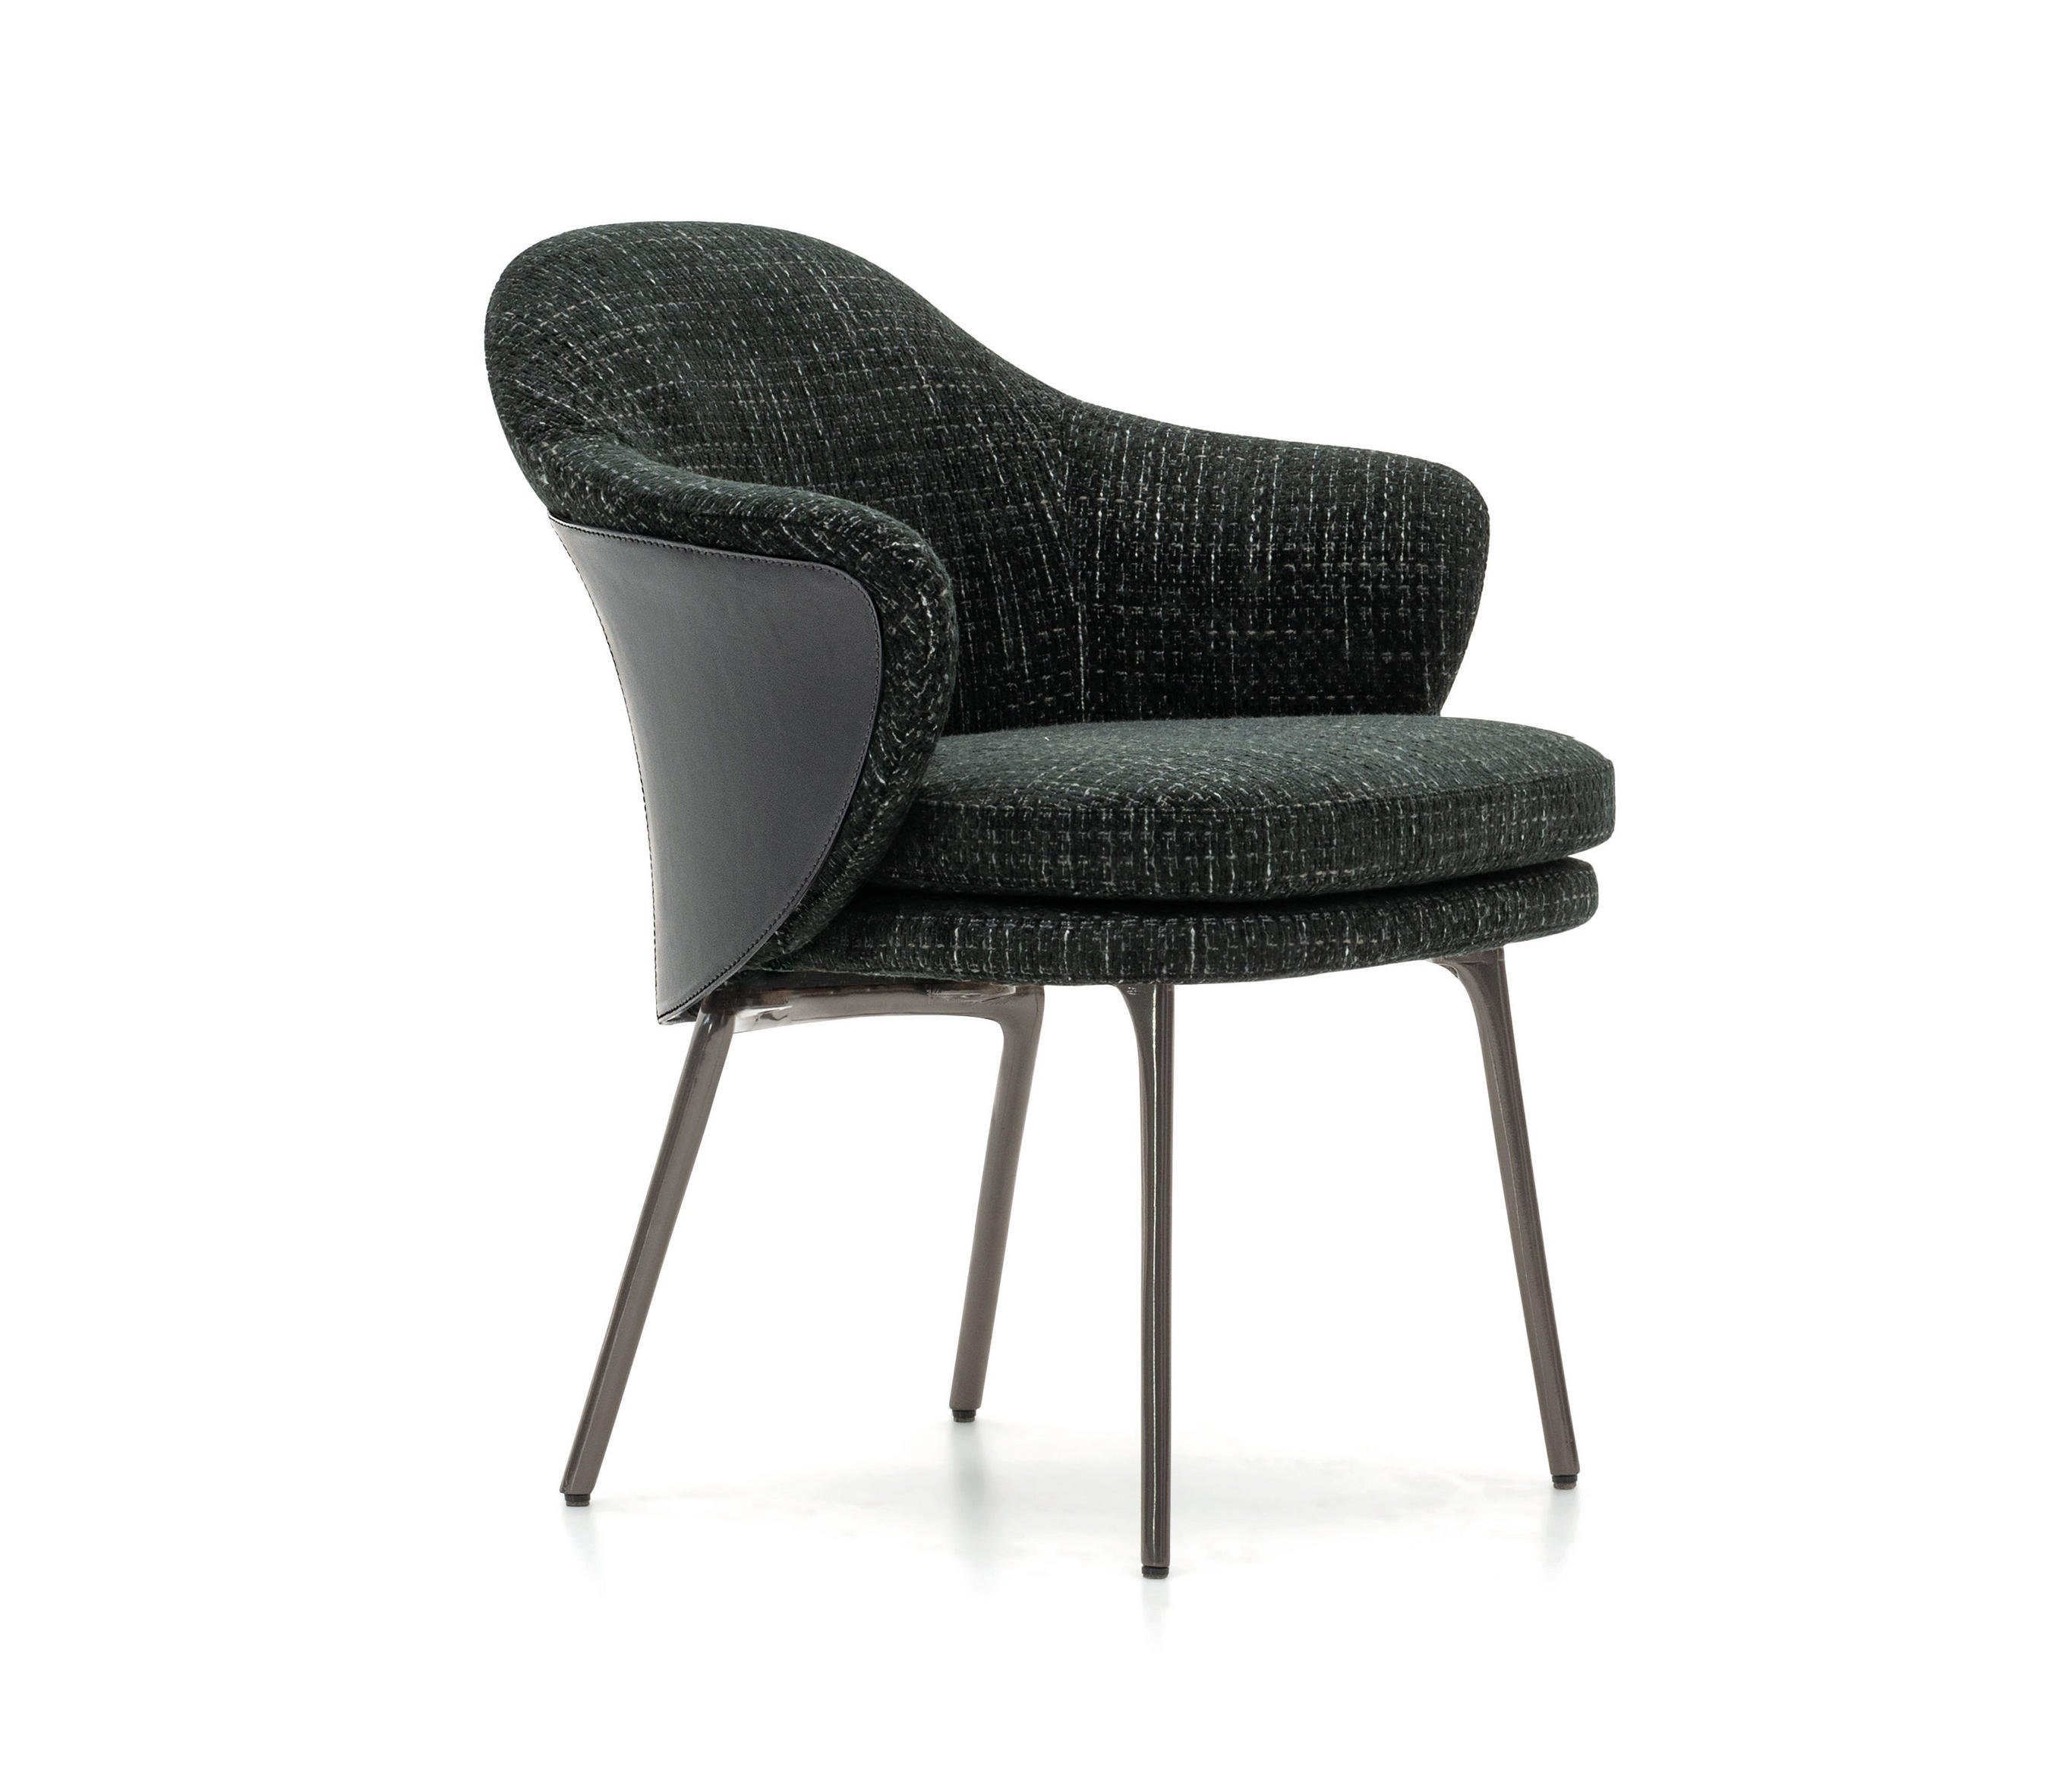 Angie Chair by Minotti